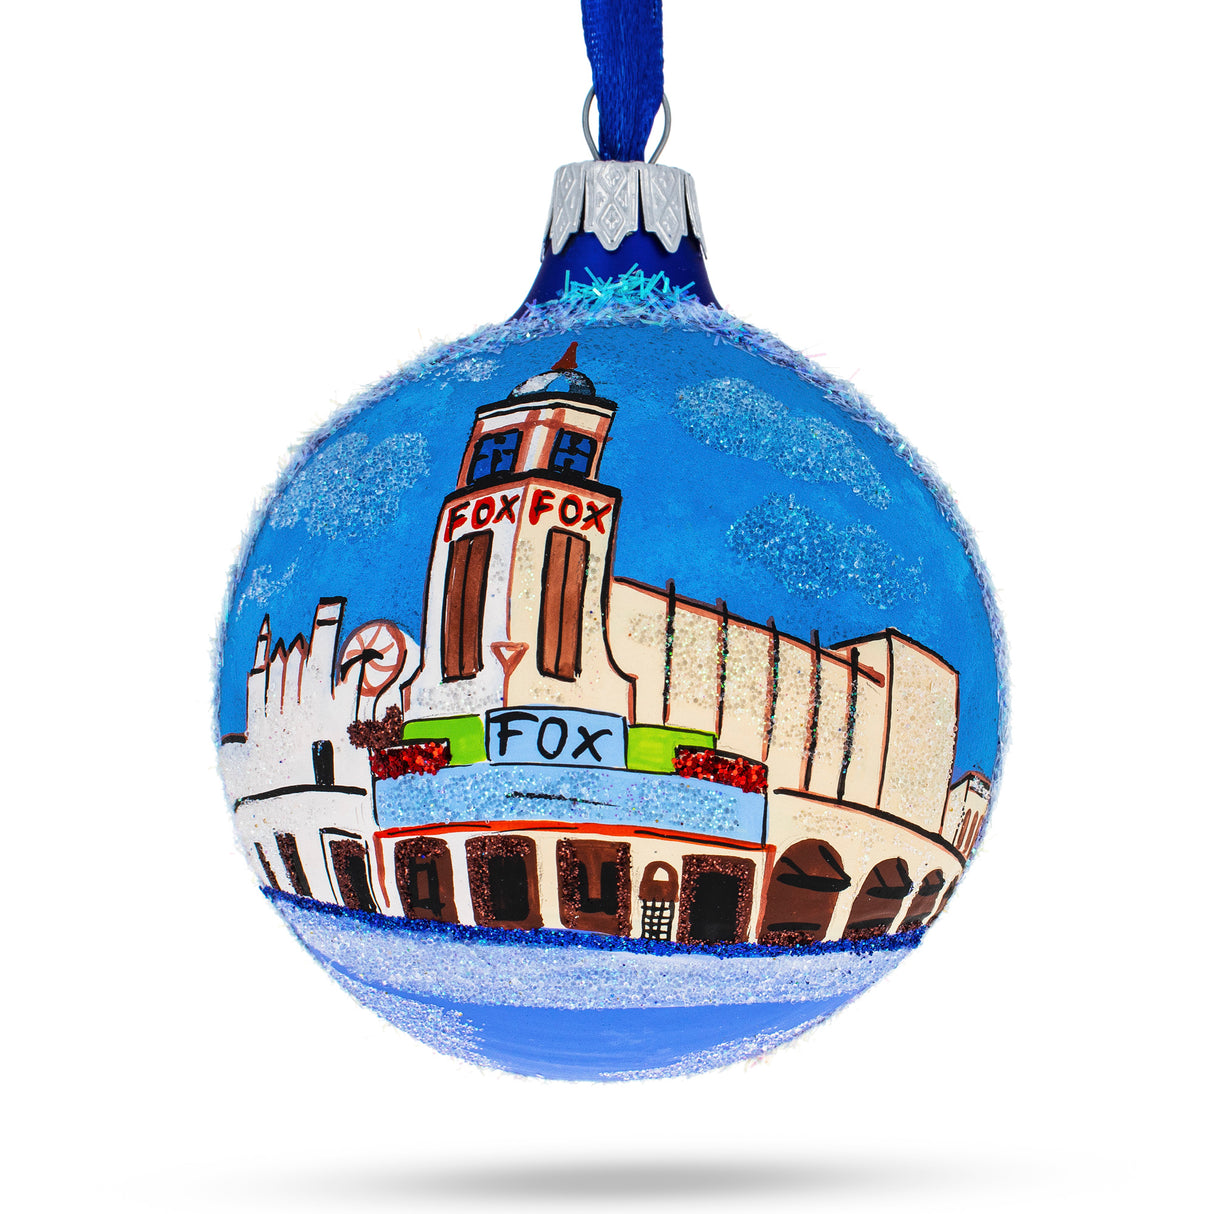 Bakersfield, California Glass Ball Christmas Ornament 3.25 Inches in Multi color, Round shape